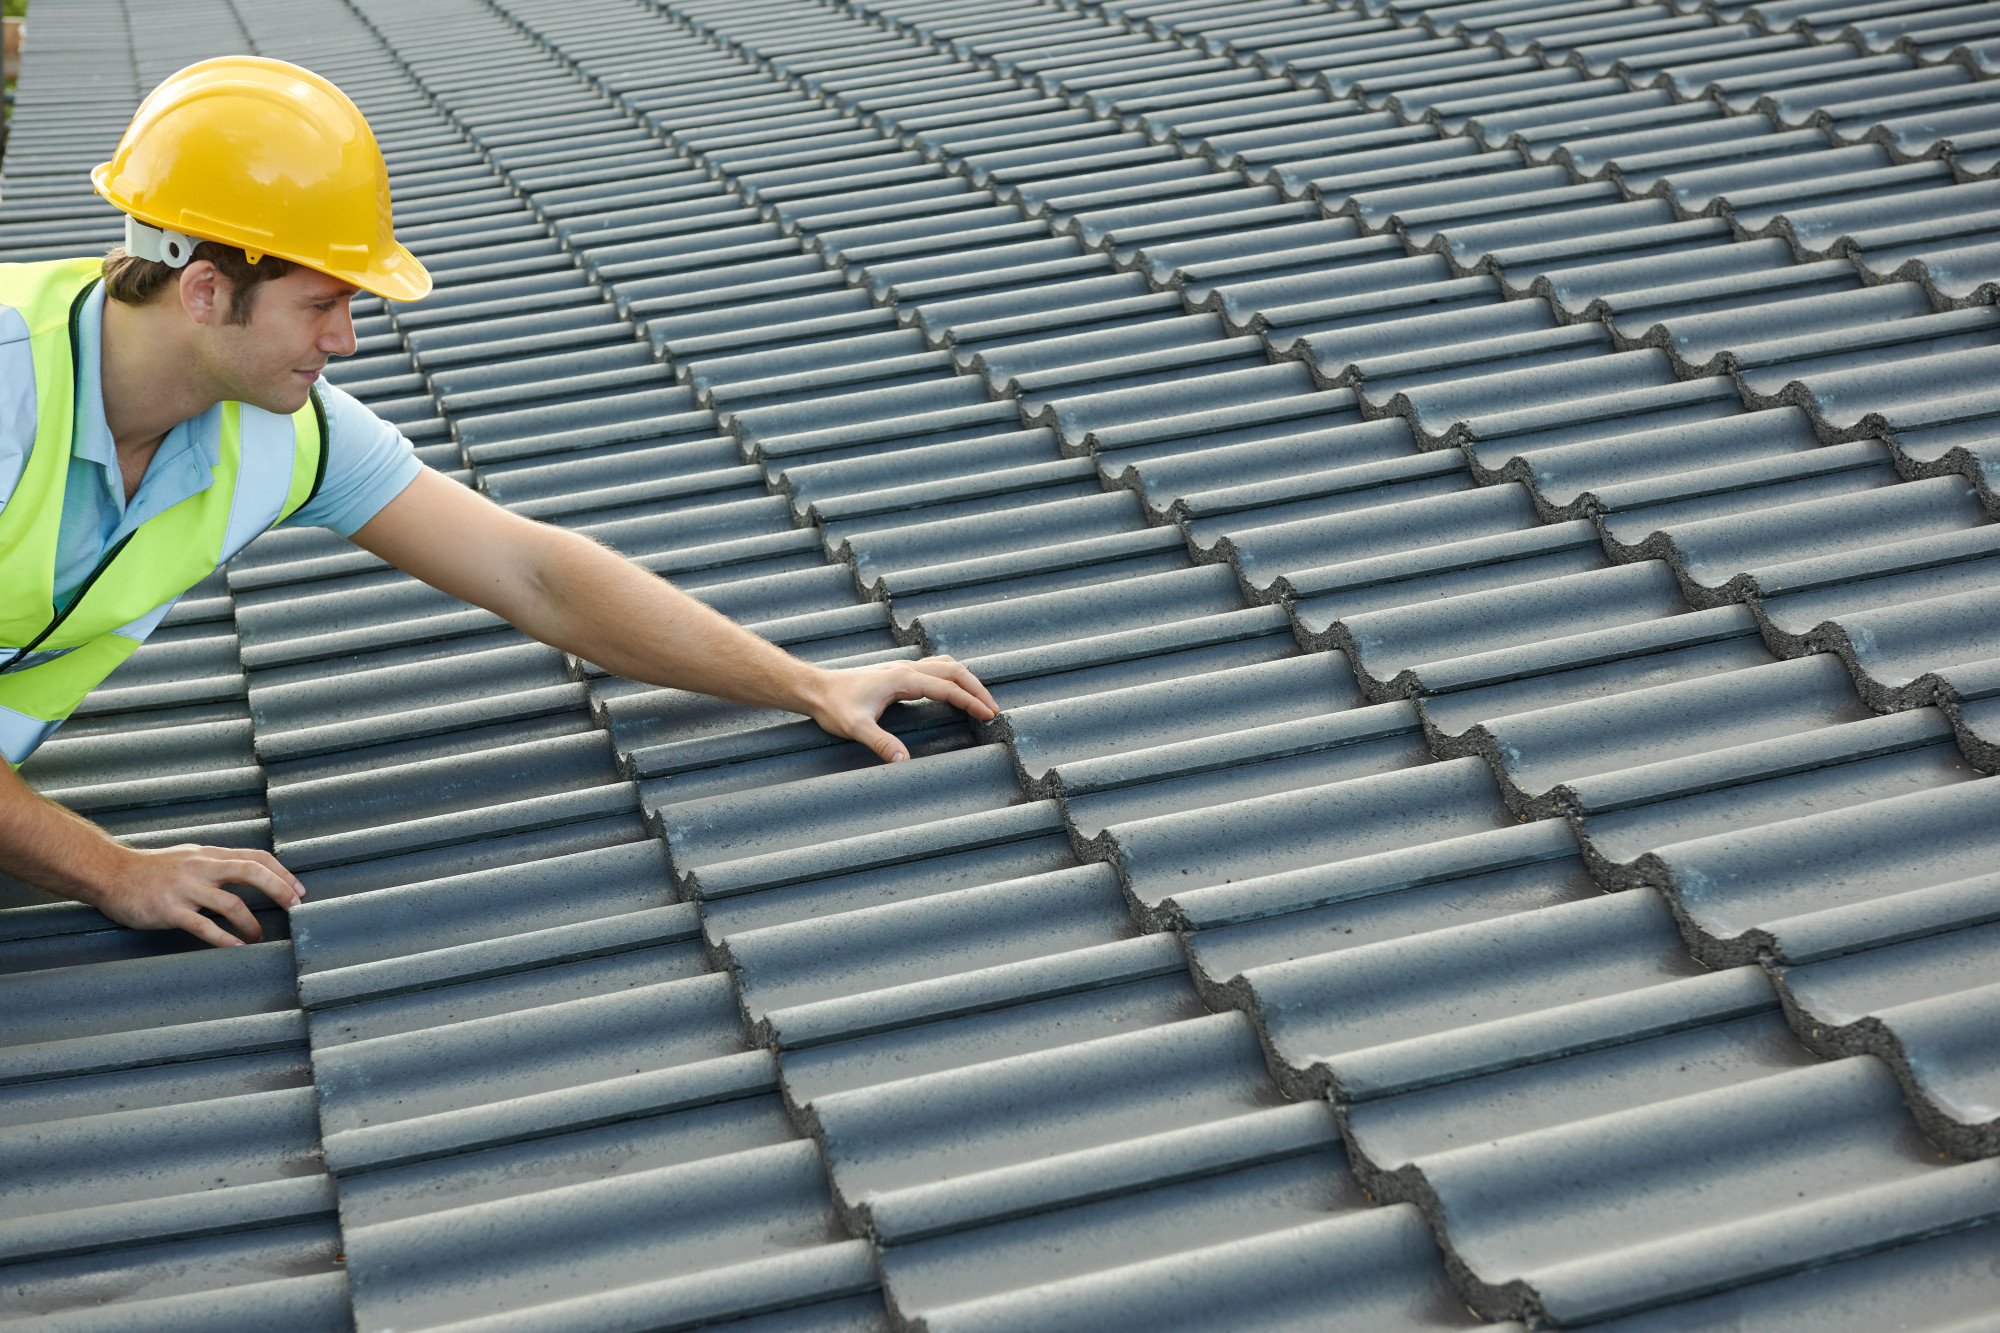 Regular roof inspections are essential to keep your roof in top shape. See our roof inspection checklist for the items a roof inspection needs to include.